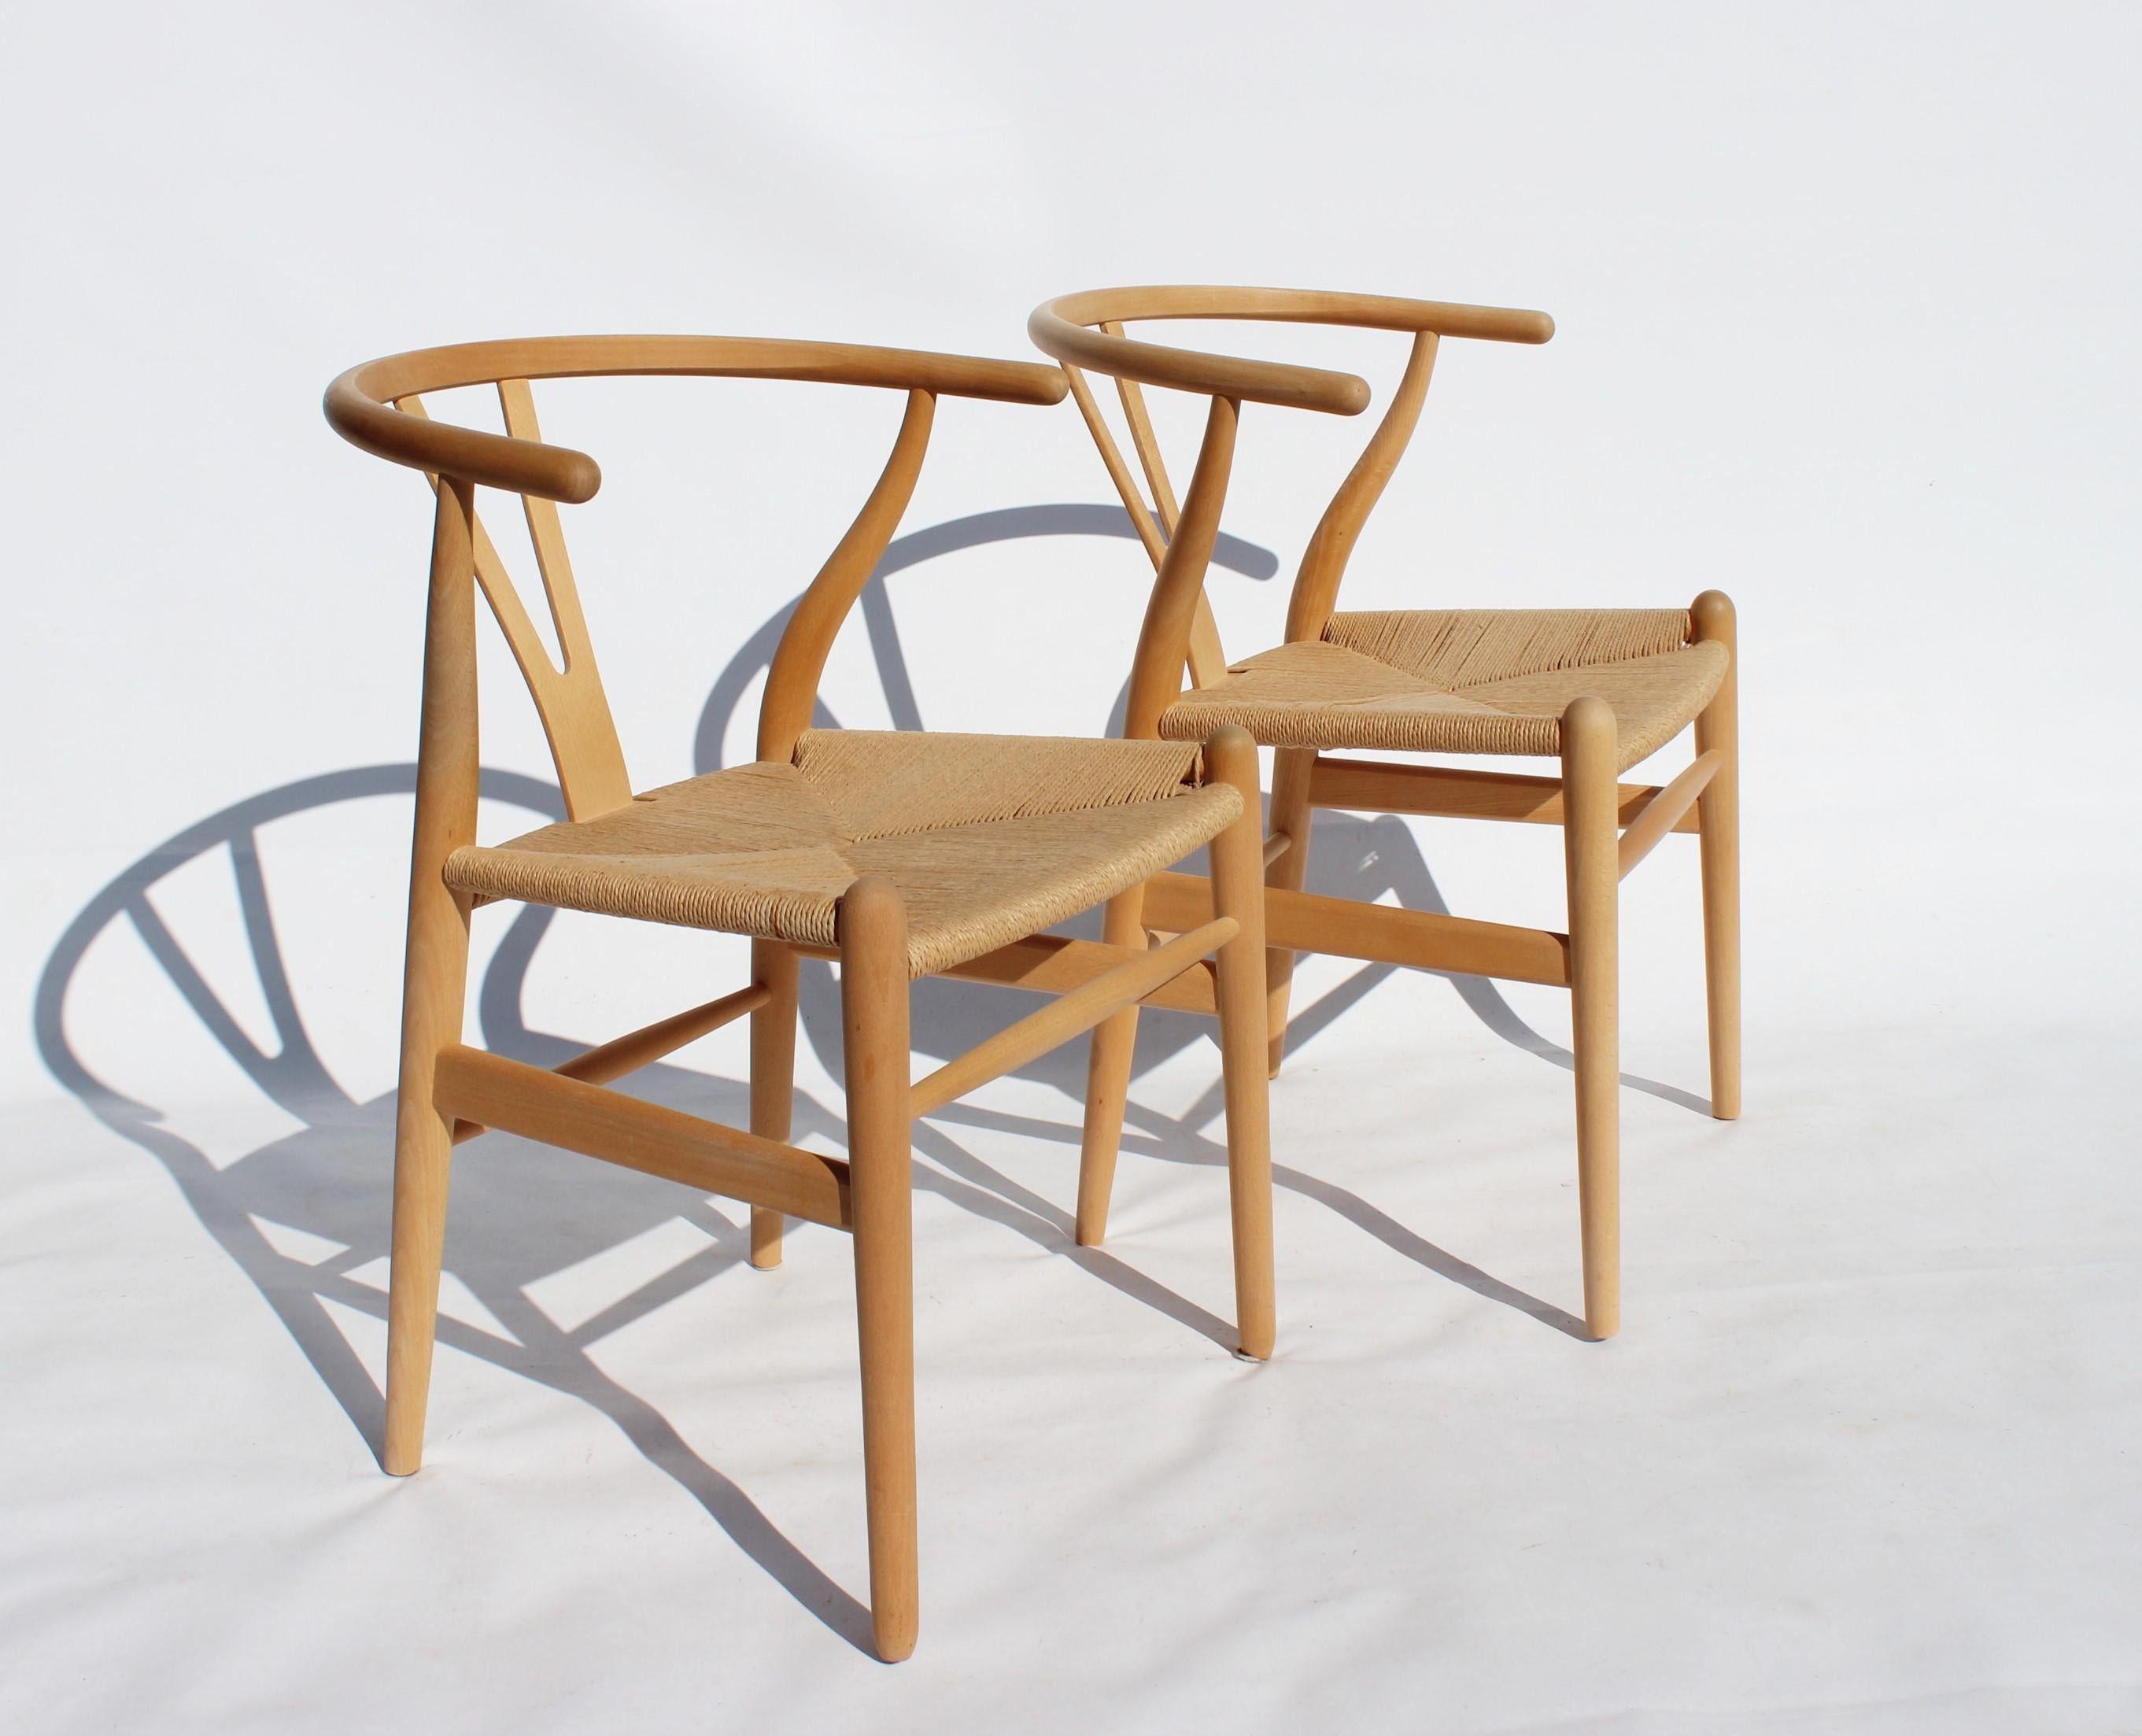 Set of two wishbone chairs, model CH24, of beech and papercord designed by Hans J. Wegner and manufactured by Carl Hansen & Son in the 1960s. The chairs are in great vintage condition.